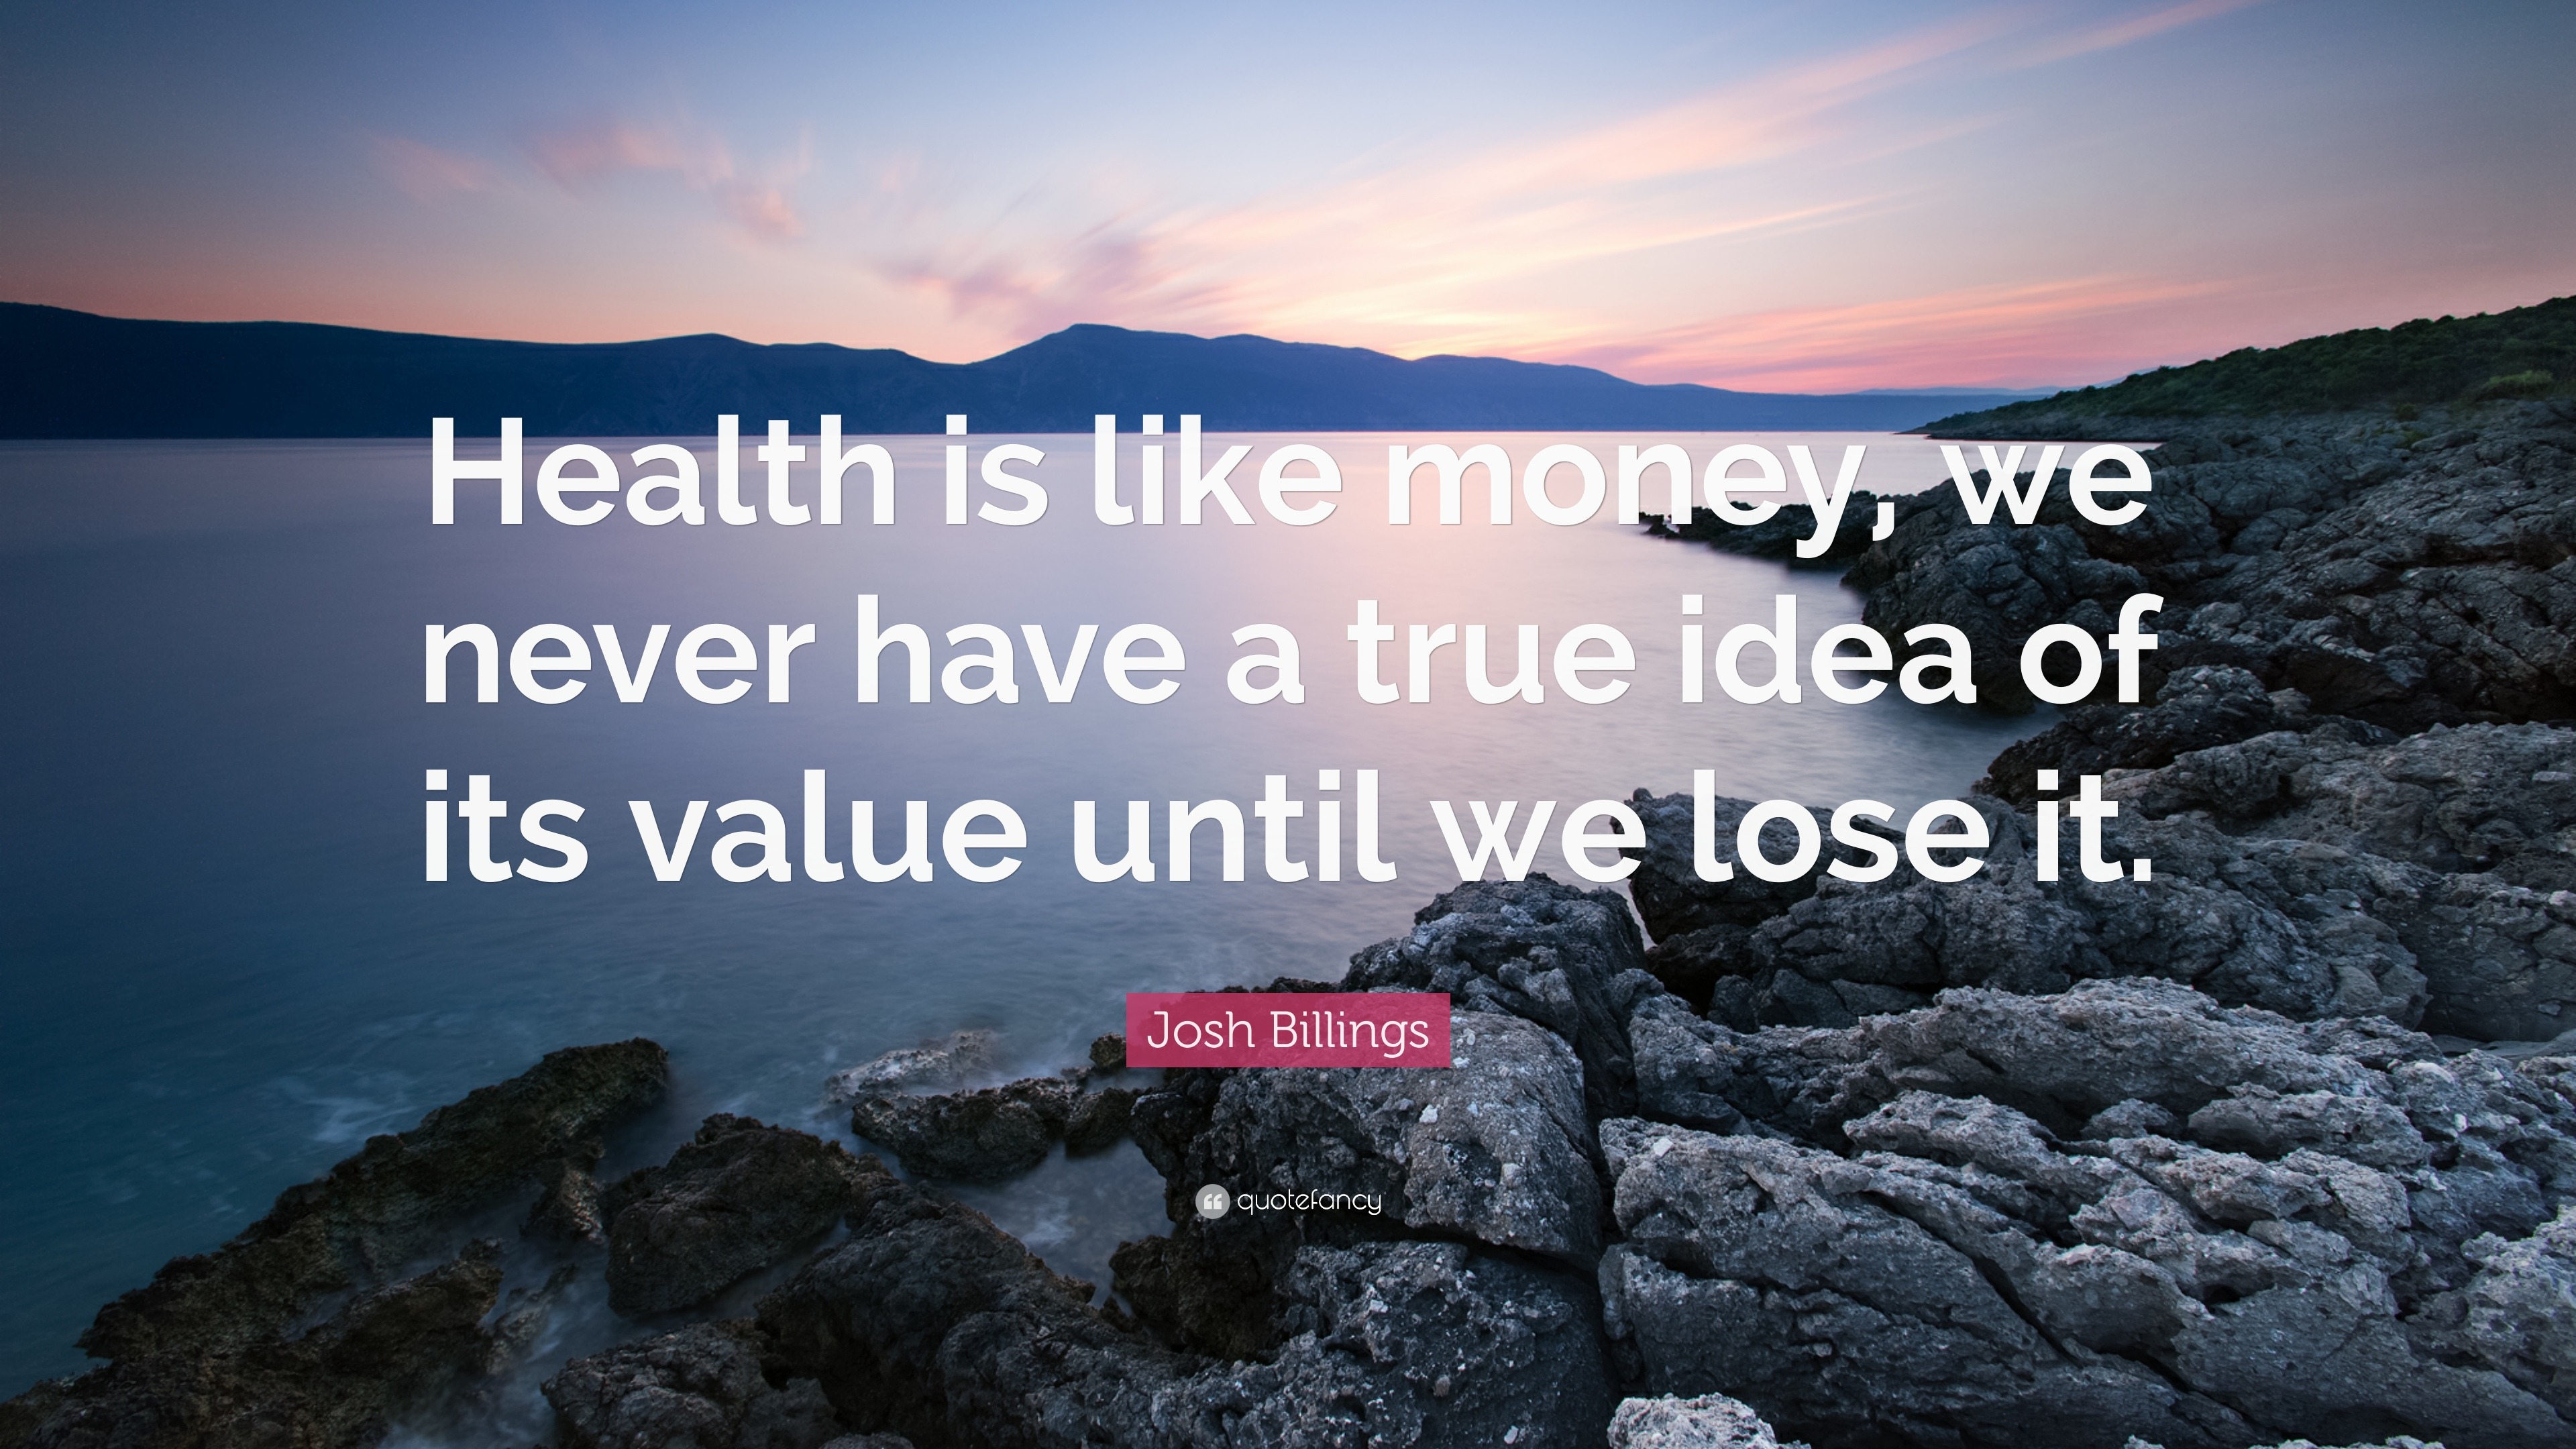 Josh Billings Quote: “Health is like money, we never have a true idea